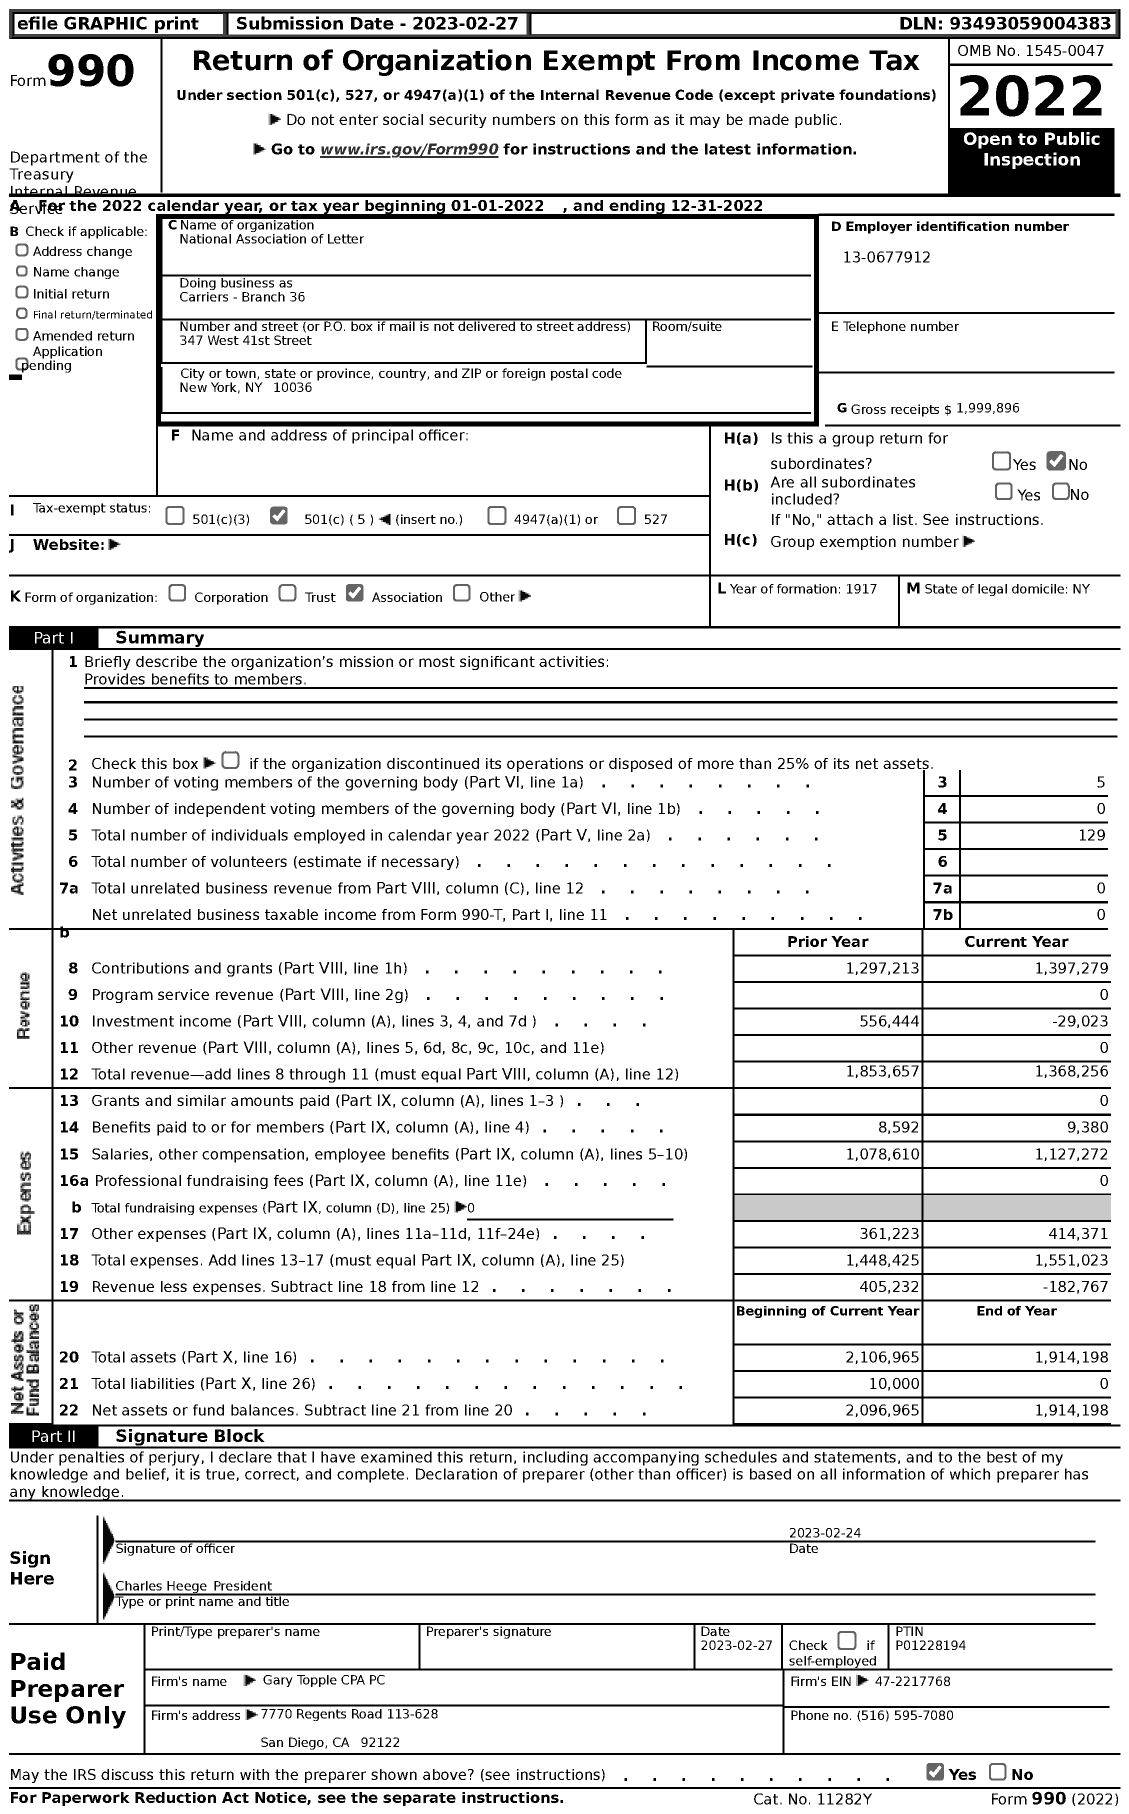 Image of first page of 2022 Form 990 for National Association of Letter Carriers - Carriers - Branch 36